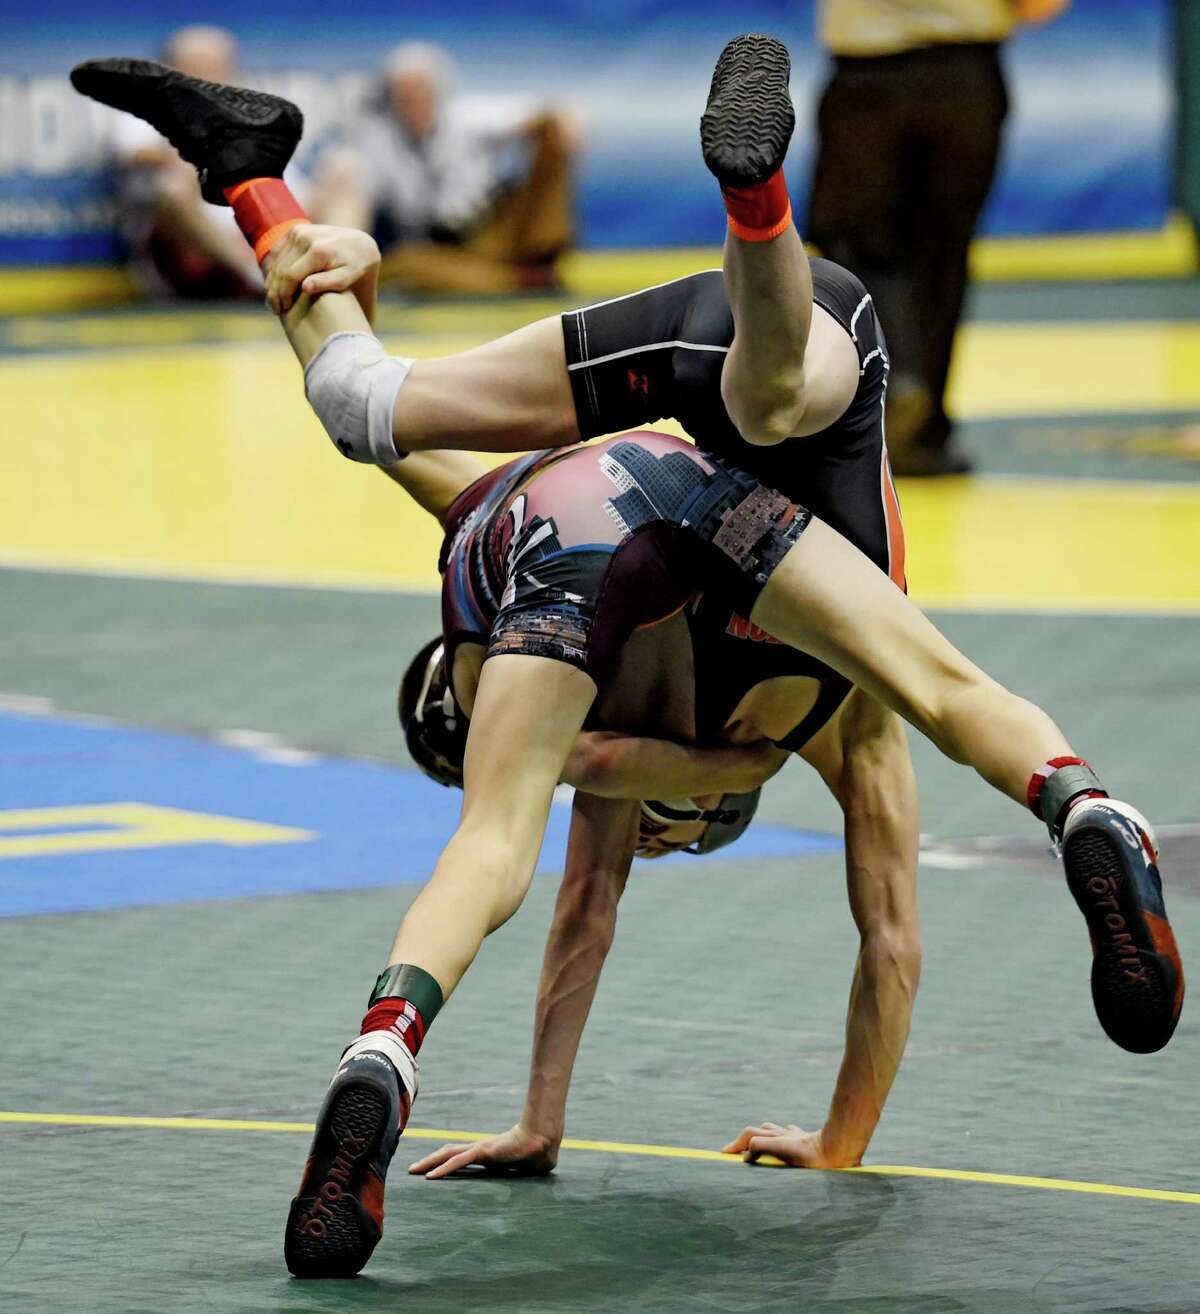 Matt Leporte of Hoosick Falls flips Dalton Gardner of Fredonia by Trent Svingala of Albany Academy, top during the 99 lb. preliminaries at the NYSPHSAA State Championship Wrestling competition held at the Times Union Arena Friday Feb. 25, 2016 in Albany, N.Y. (Skip Dickstein/Times Union)